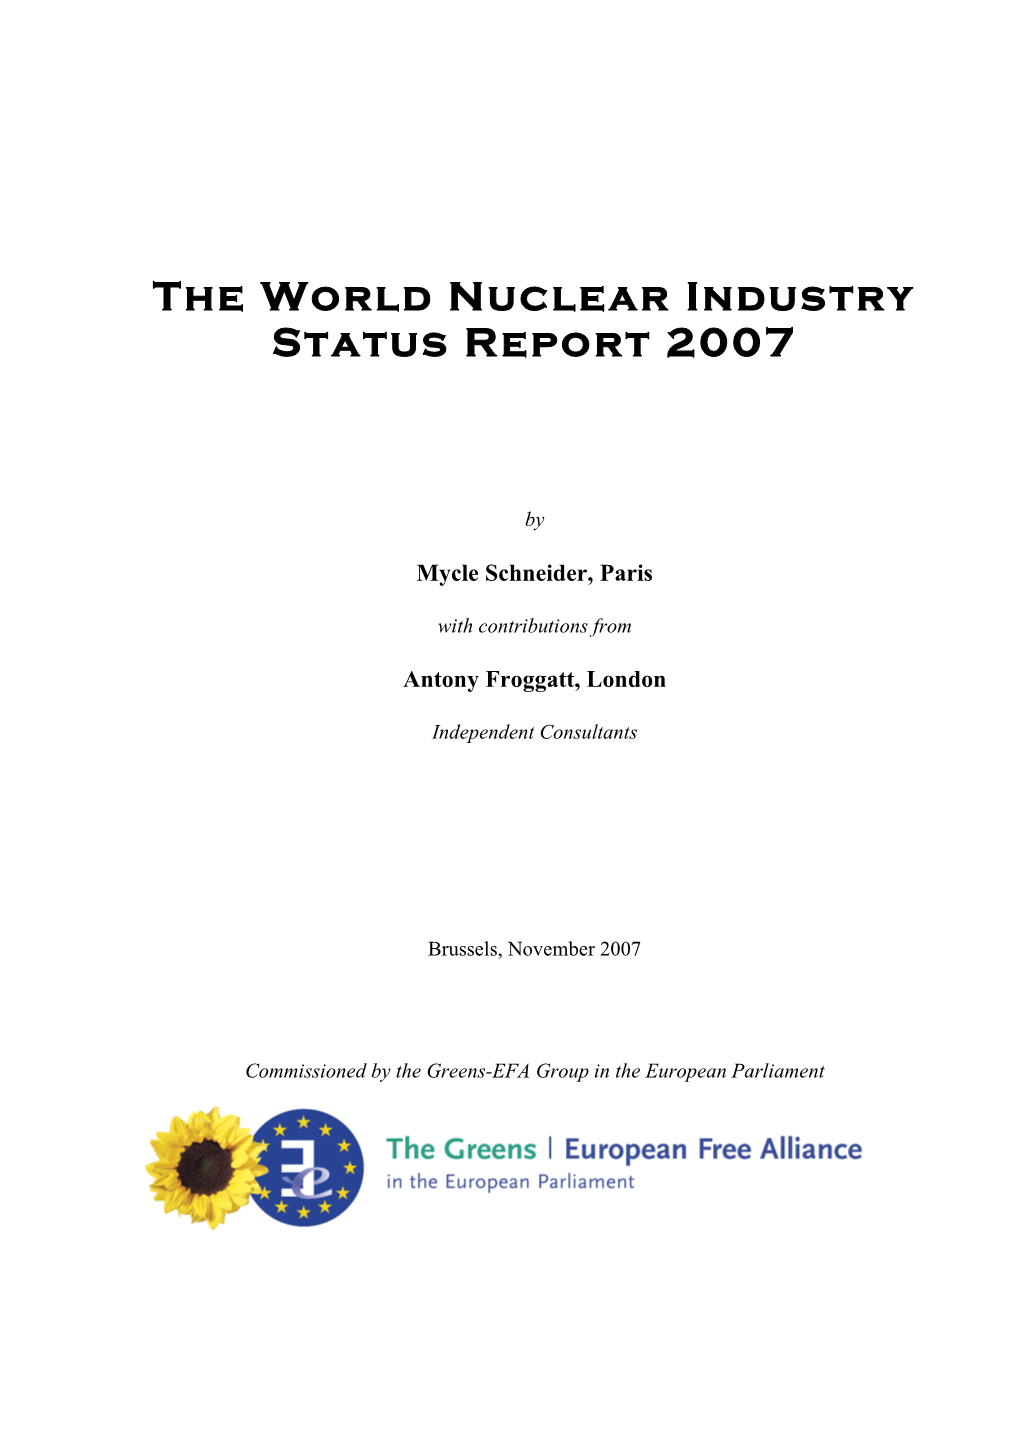 The World Nuclear Industry Status Report 2007